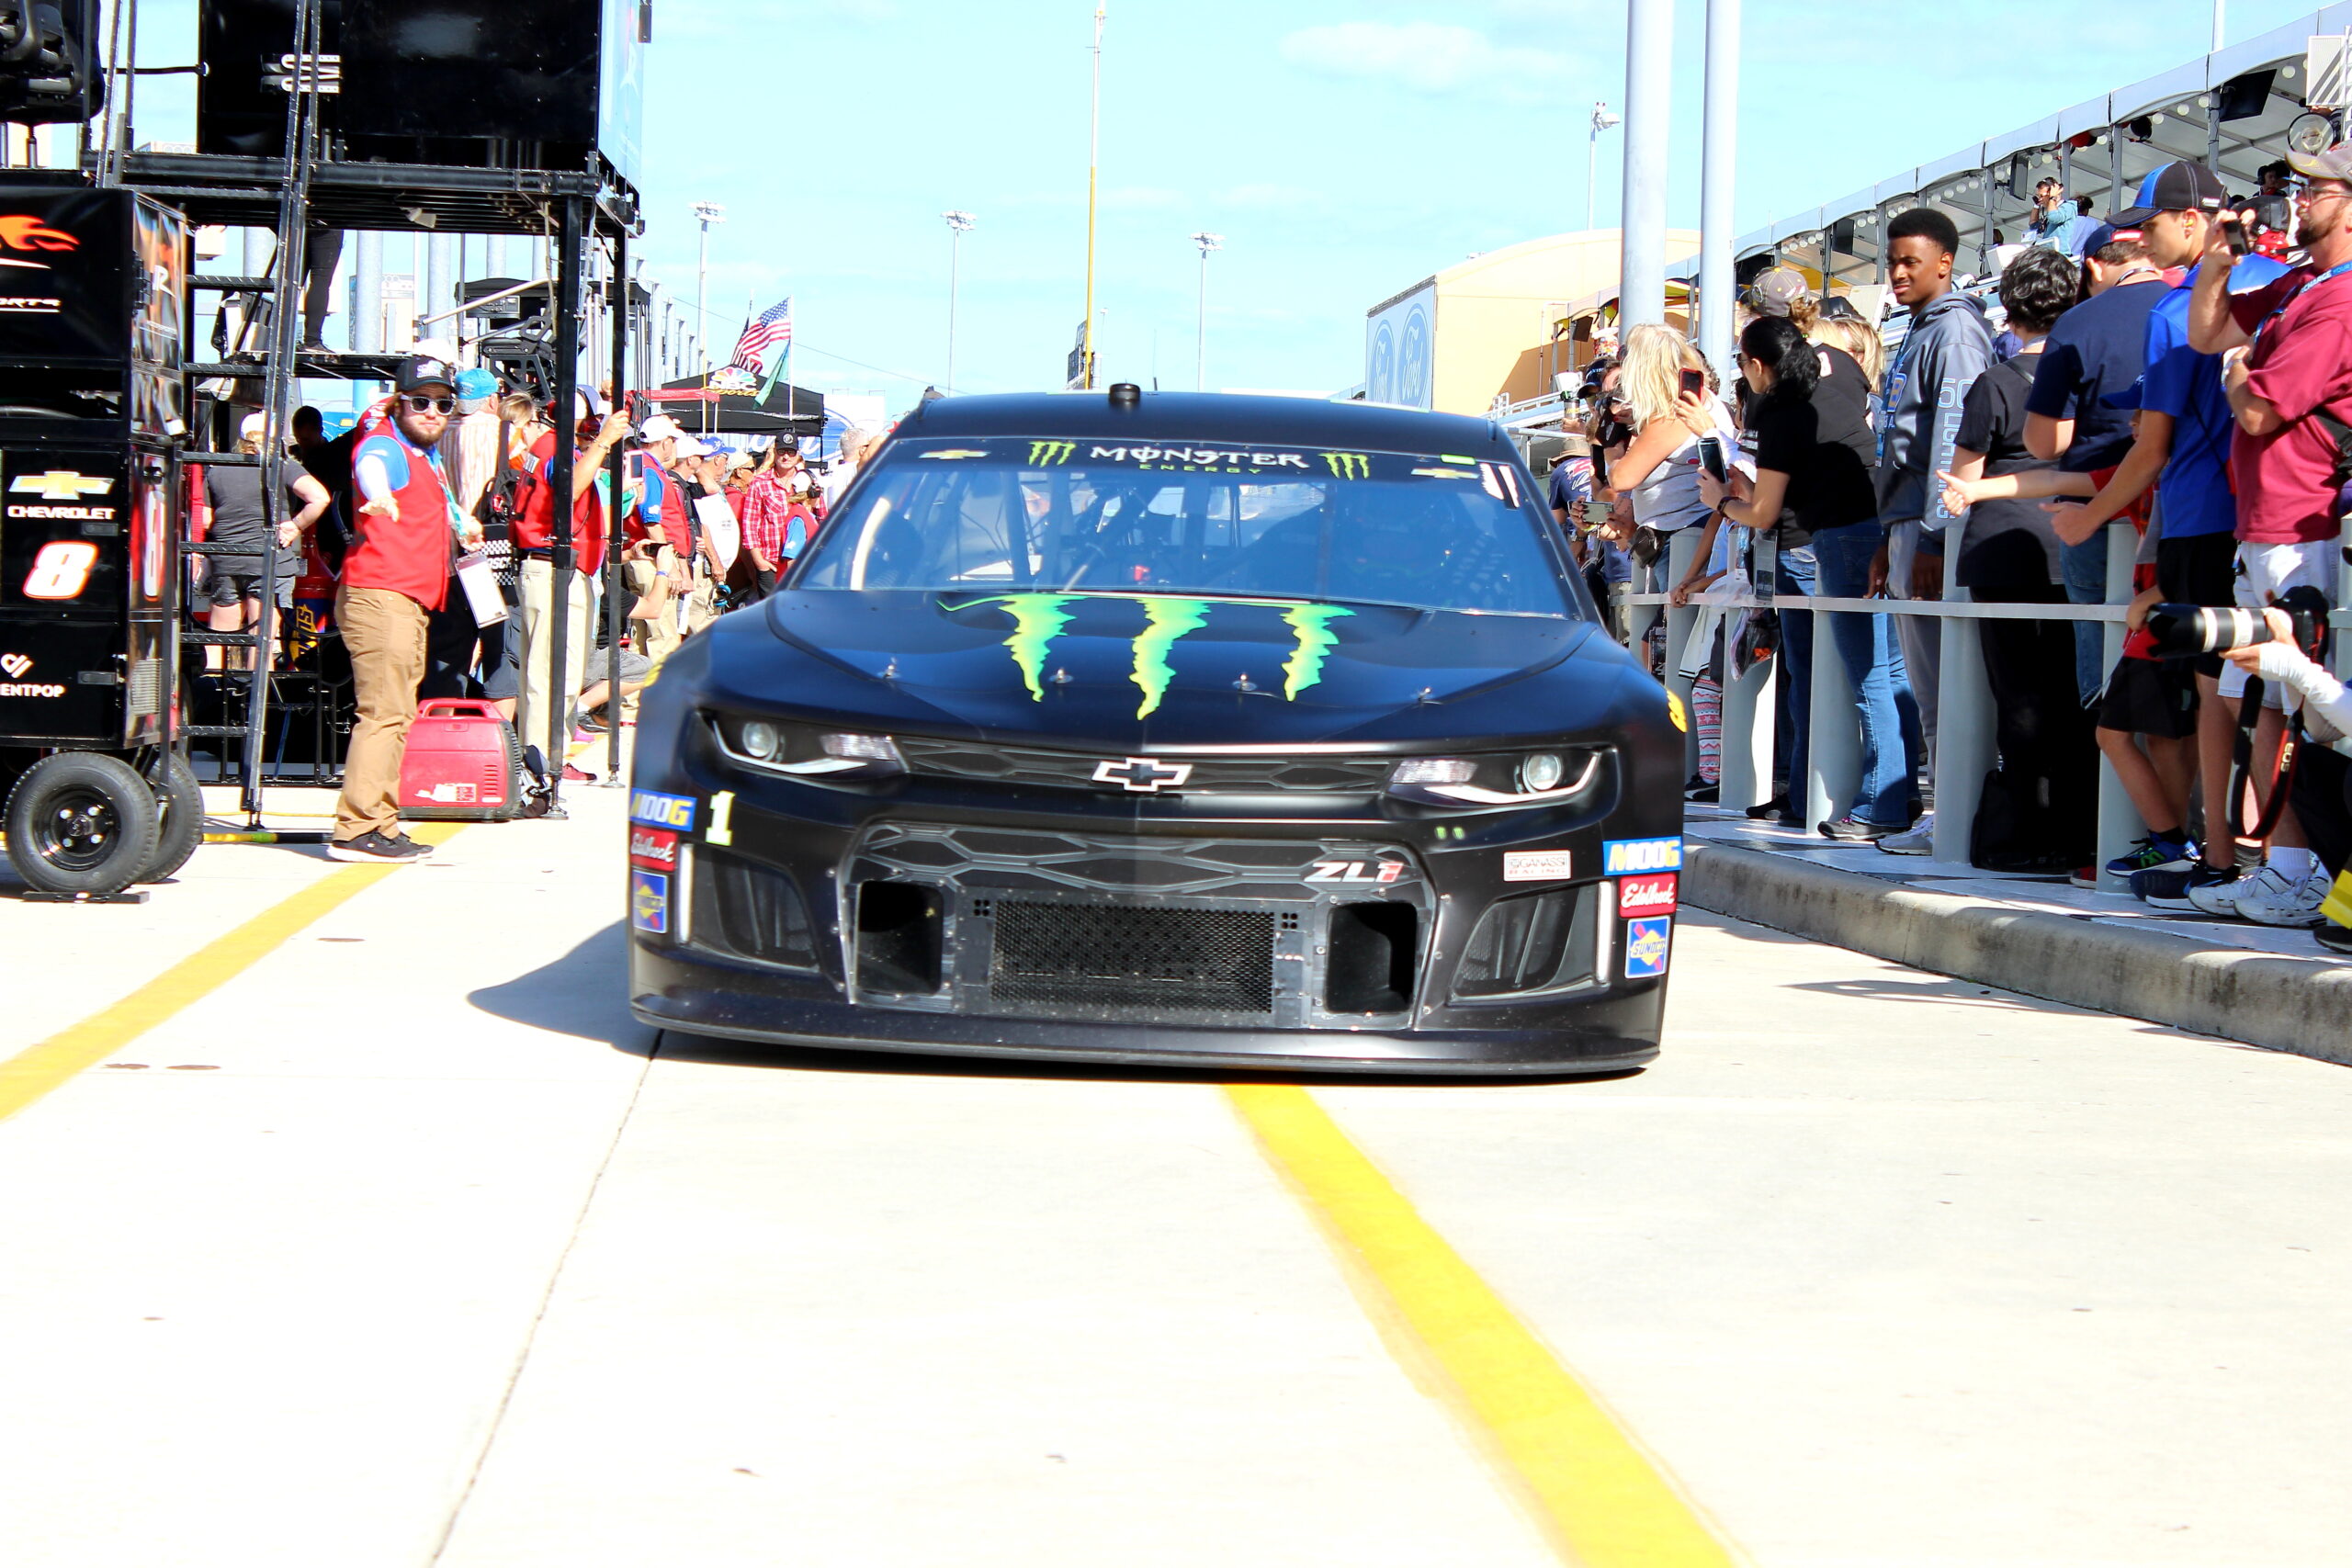 Without delay, Busch took it to the streets in his No. 1 Monster Energy Chevy Camaro. (Photo Credit: Josh Jones/TPF)